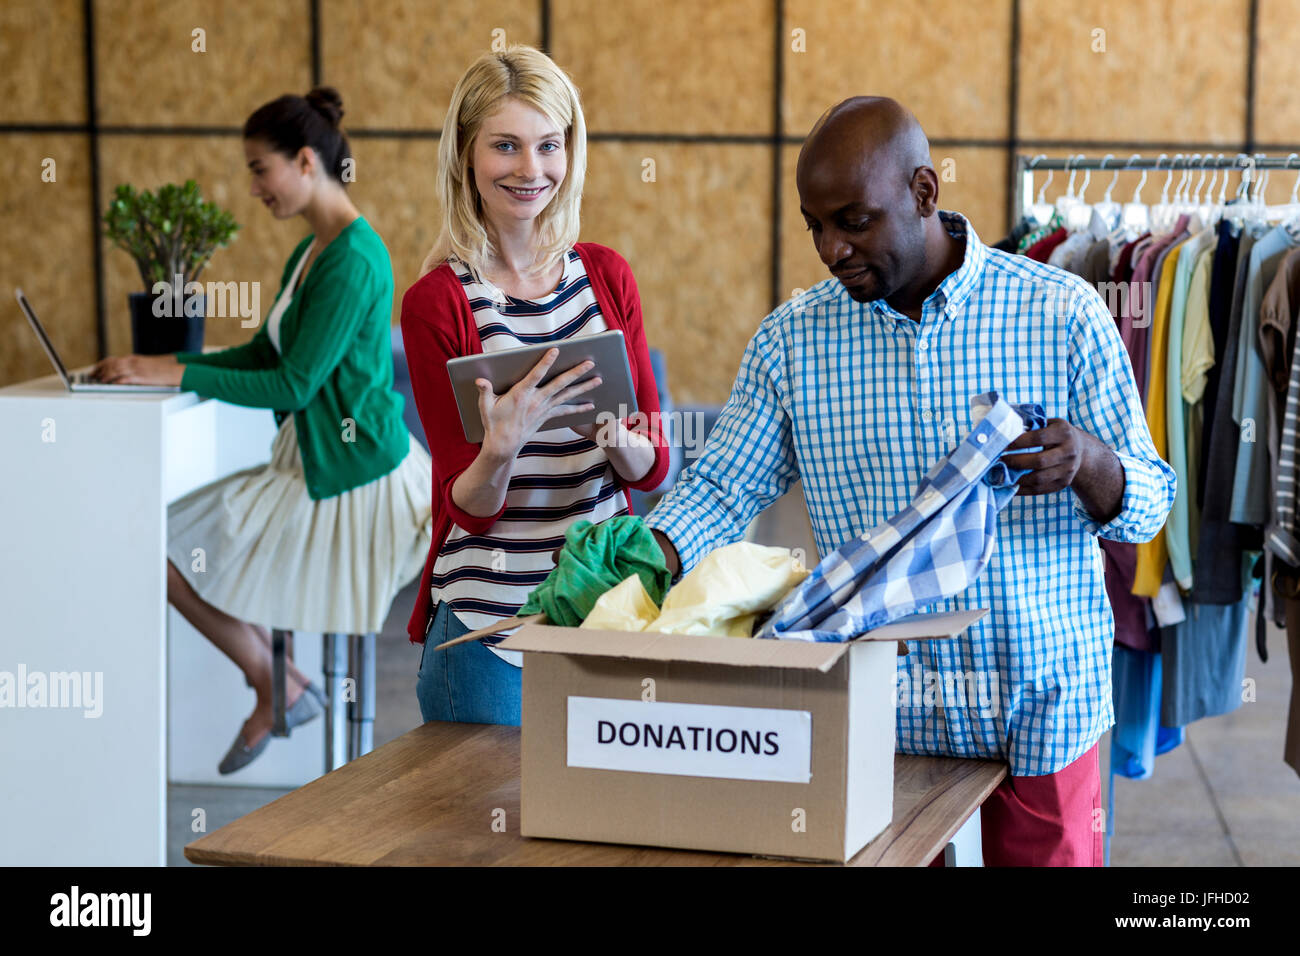 Colleagues using digital tablet while sorting clothes from donation box Stock Photo